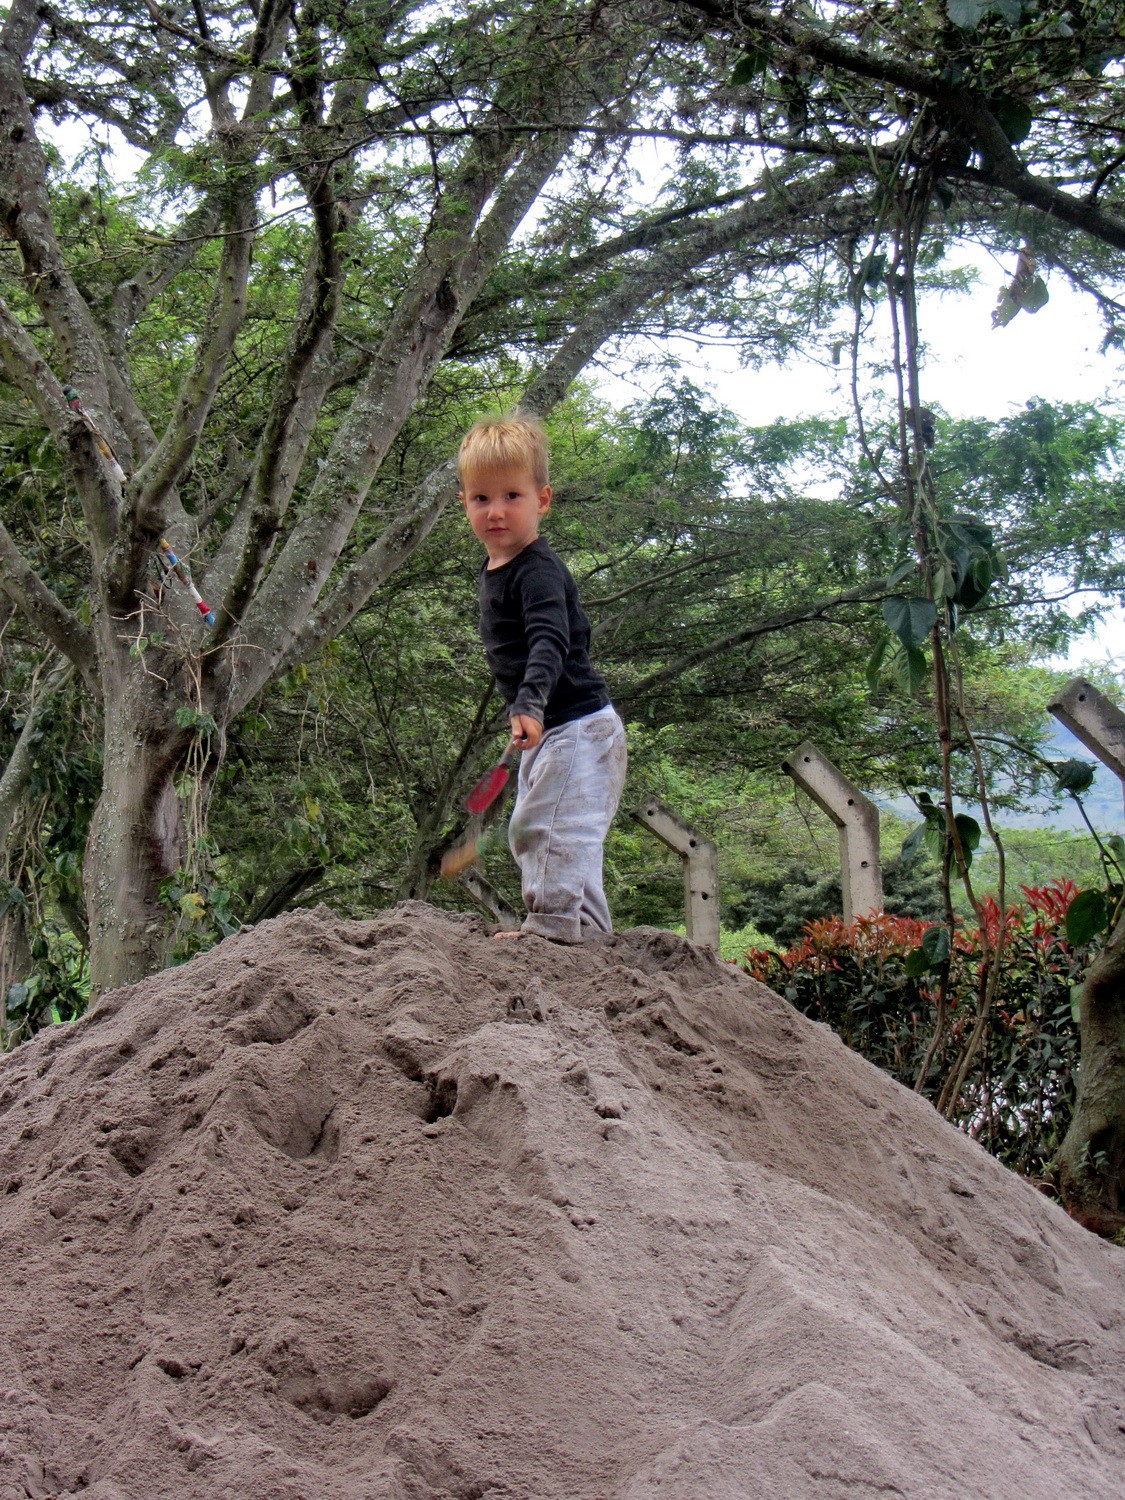 Little boy from Germany exploring Finca Sommerwind